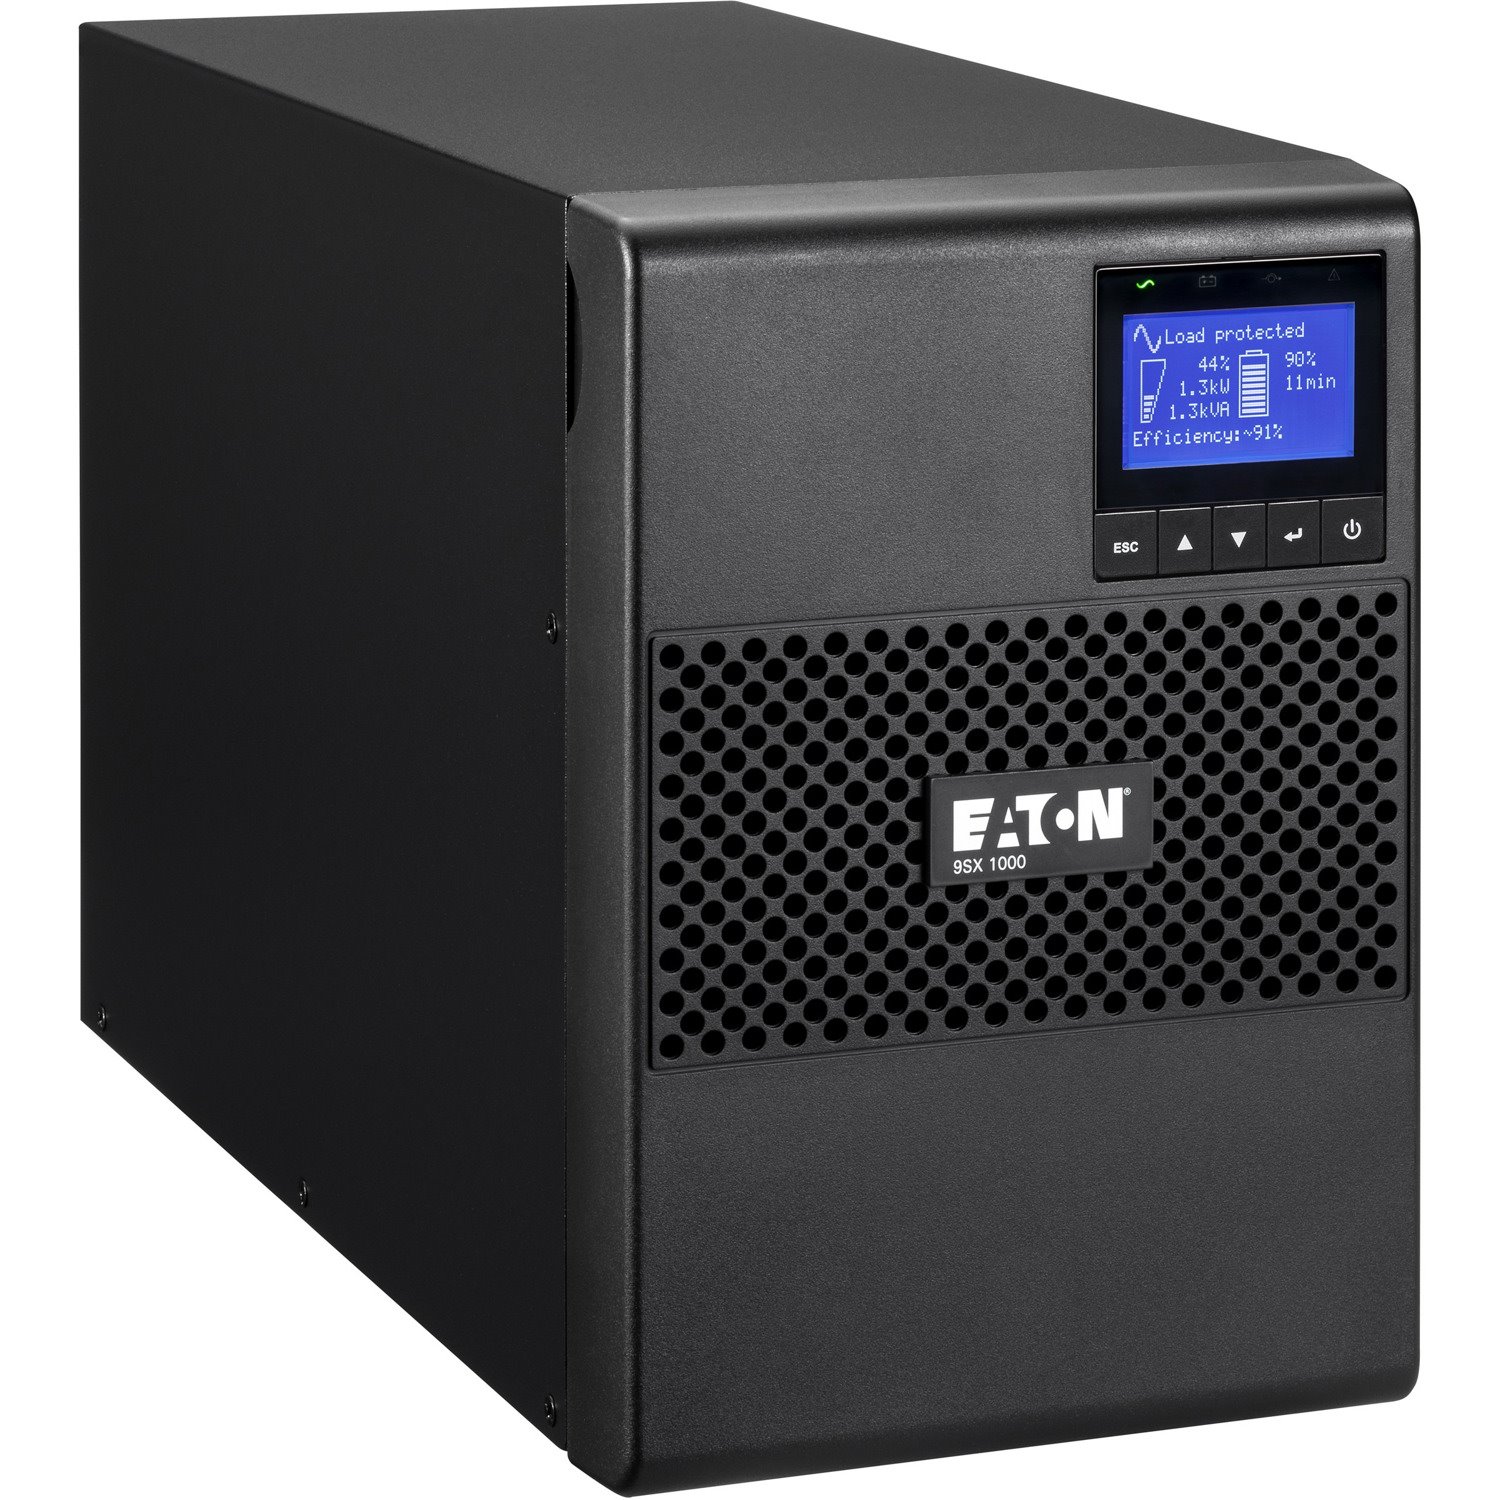 Eaton 9SX 1000VA 900W 208V Online Double-Conversion UPS - 6 C13 Outlets, Cybersecure Network Card Option, Extended Run, Tower - Battery Backup